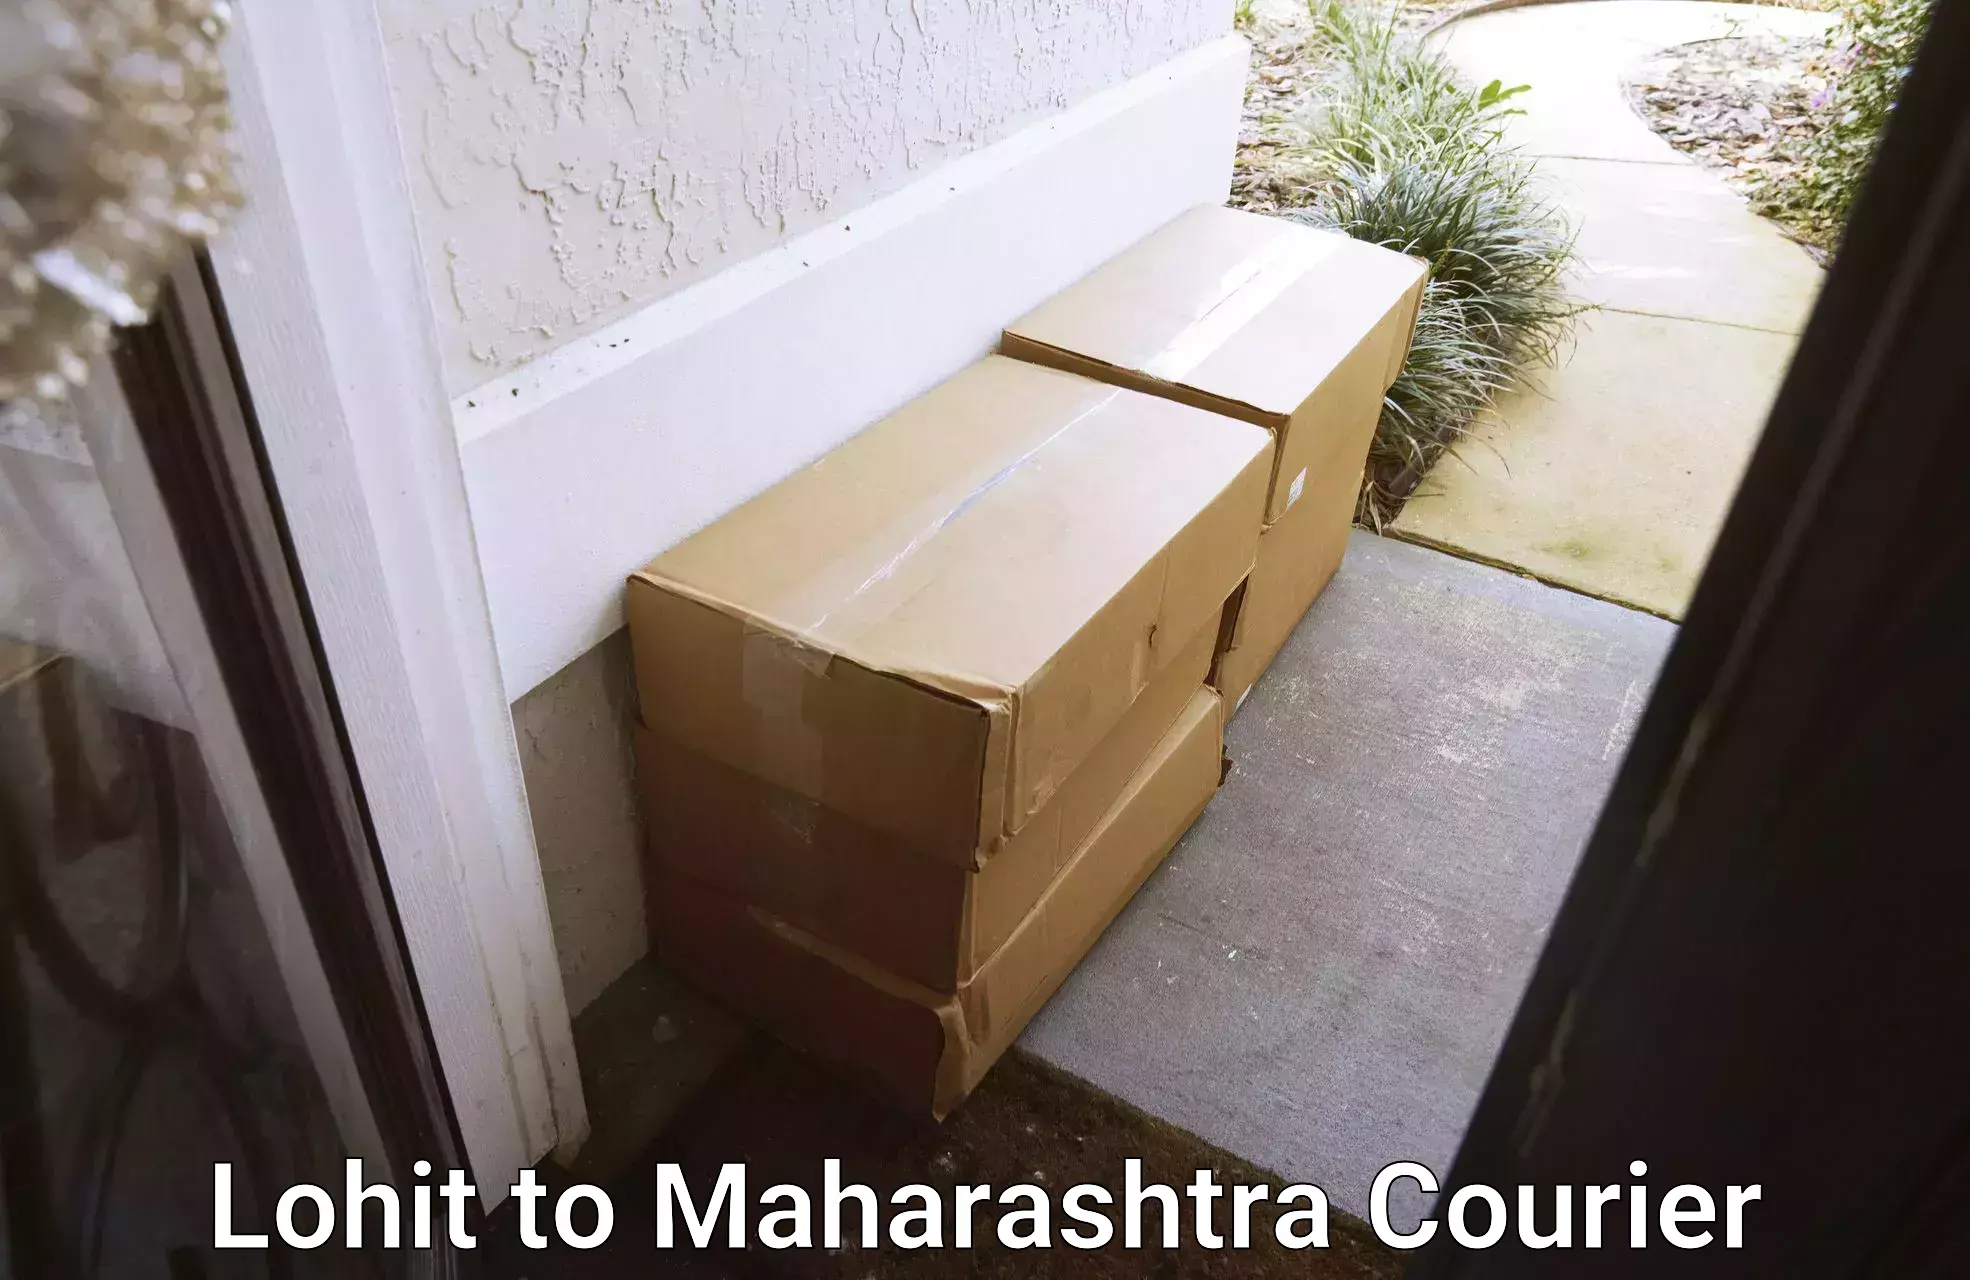 Fast-track shipping solutions Lohit to Shirdi